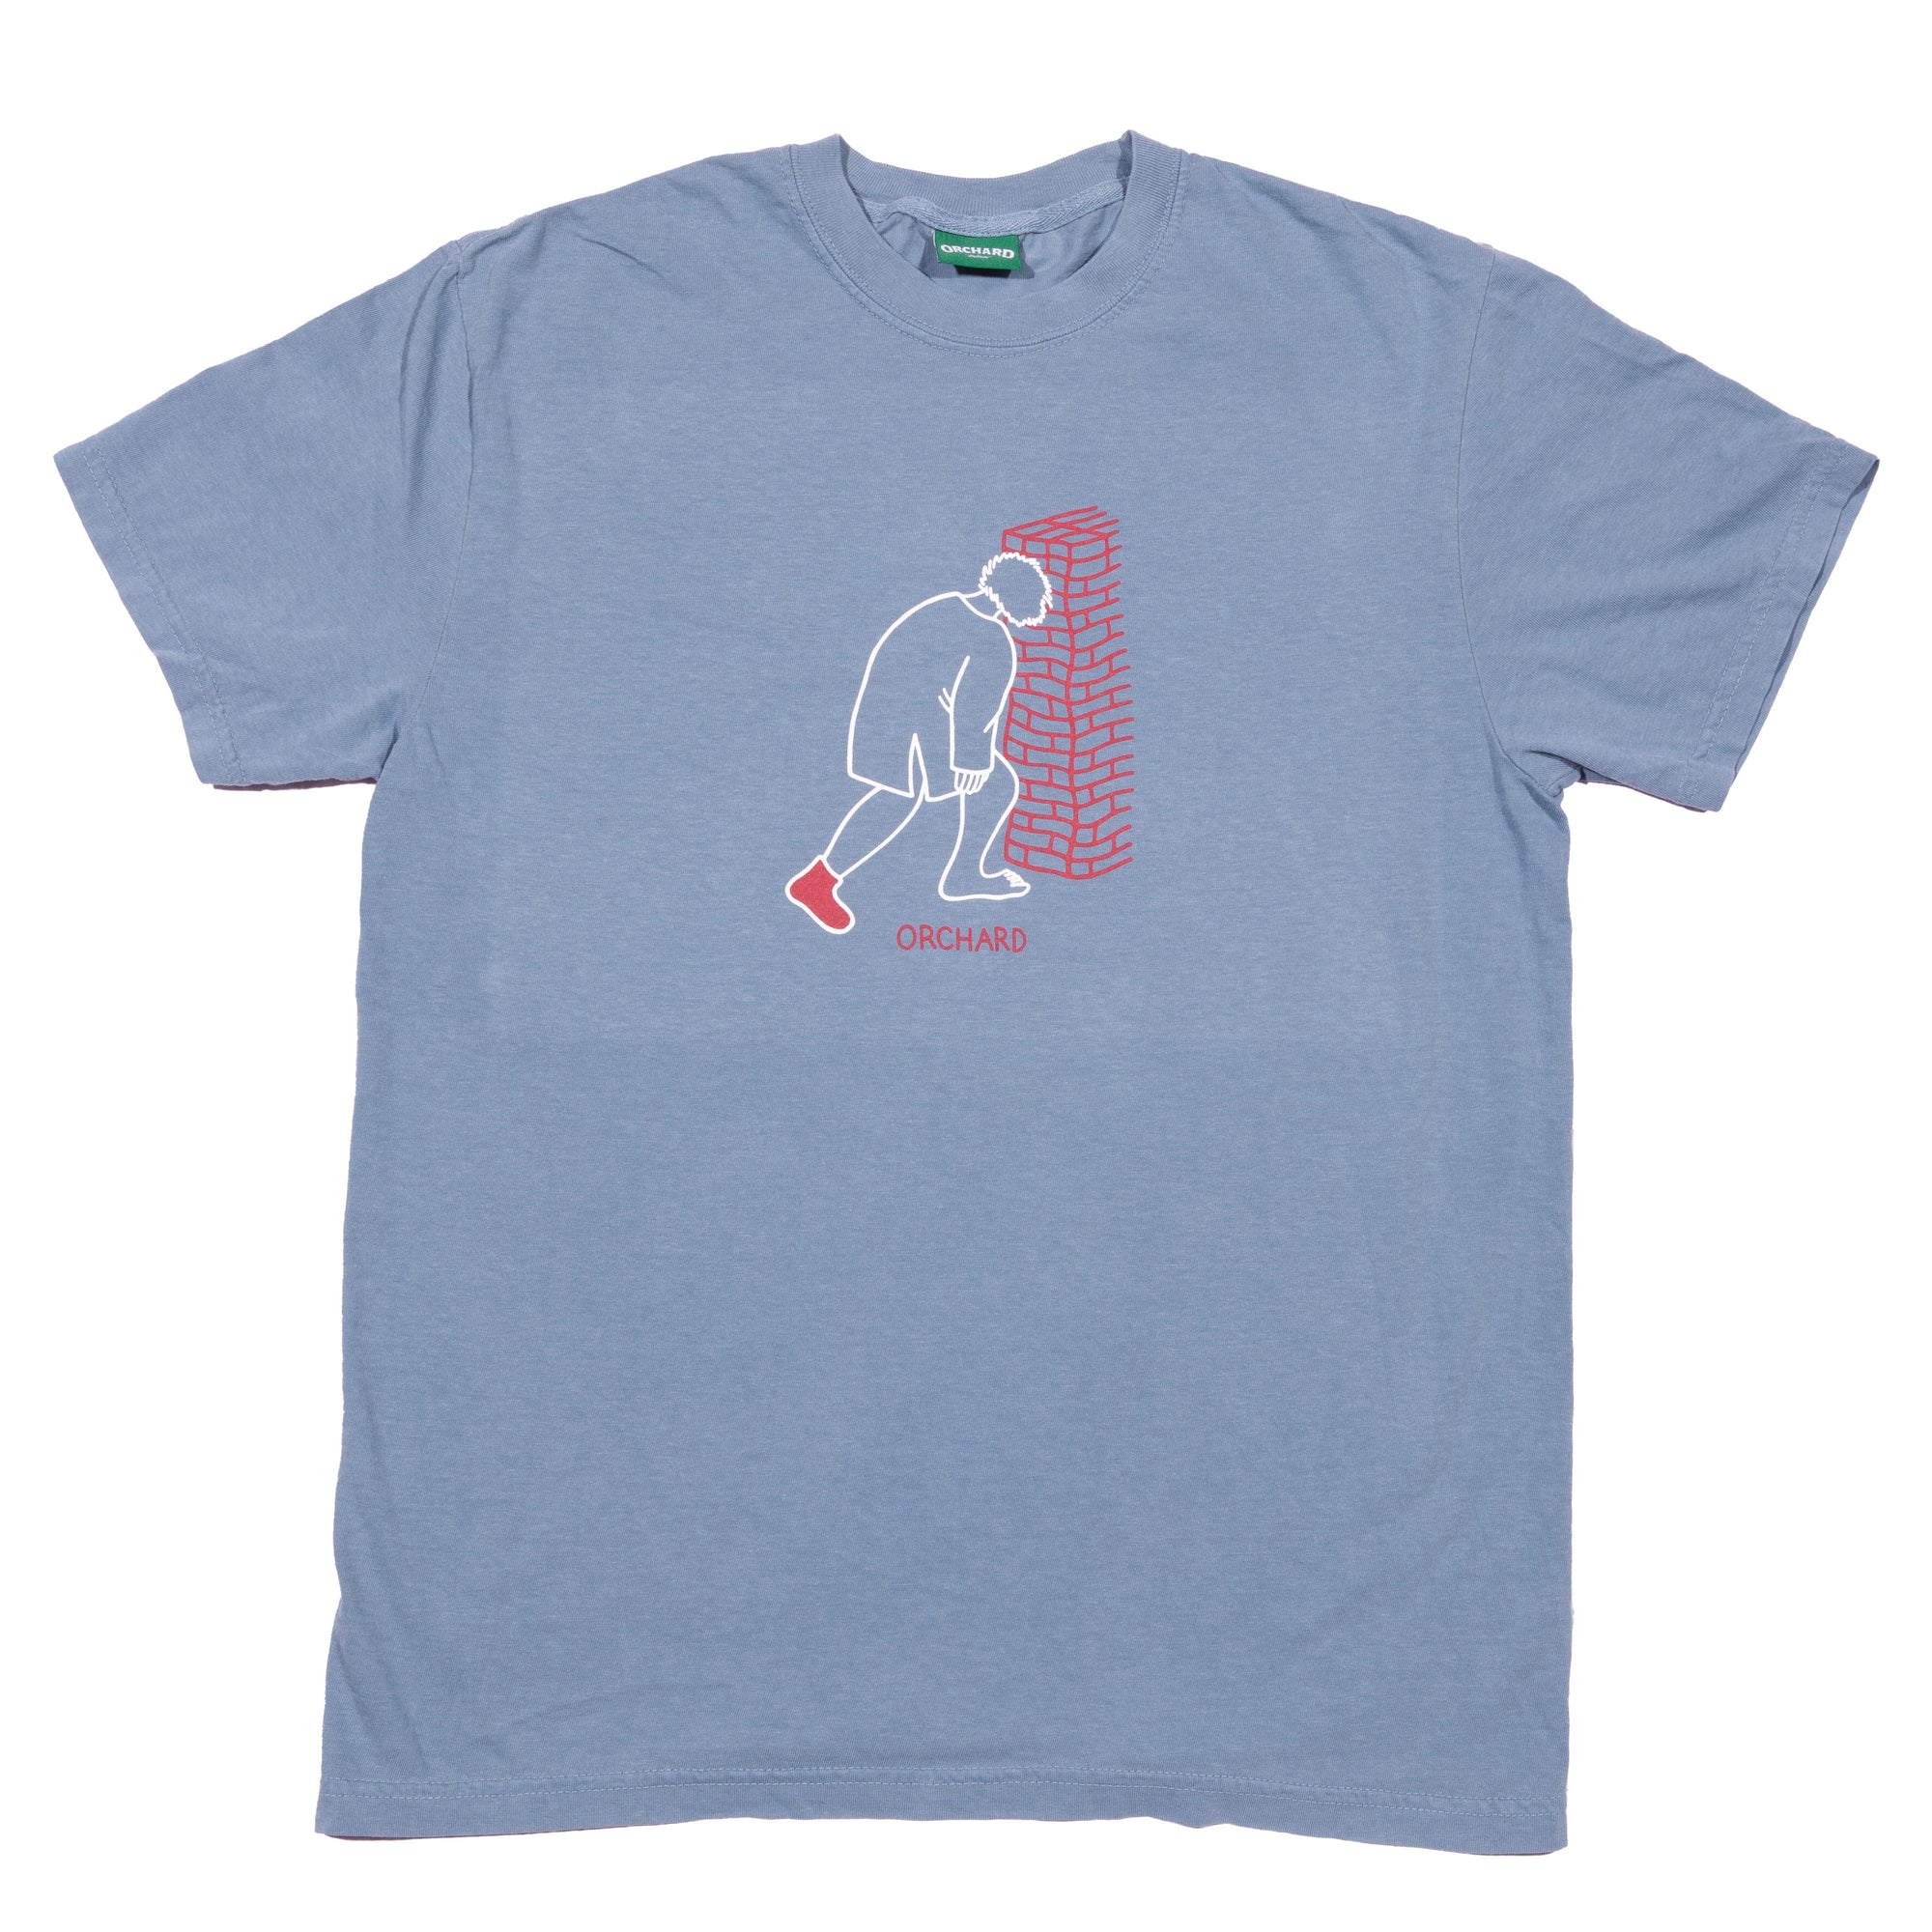 Orchard Entwistle Tee Ice Blue Garment Dyed